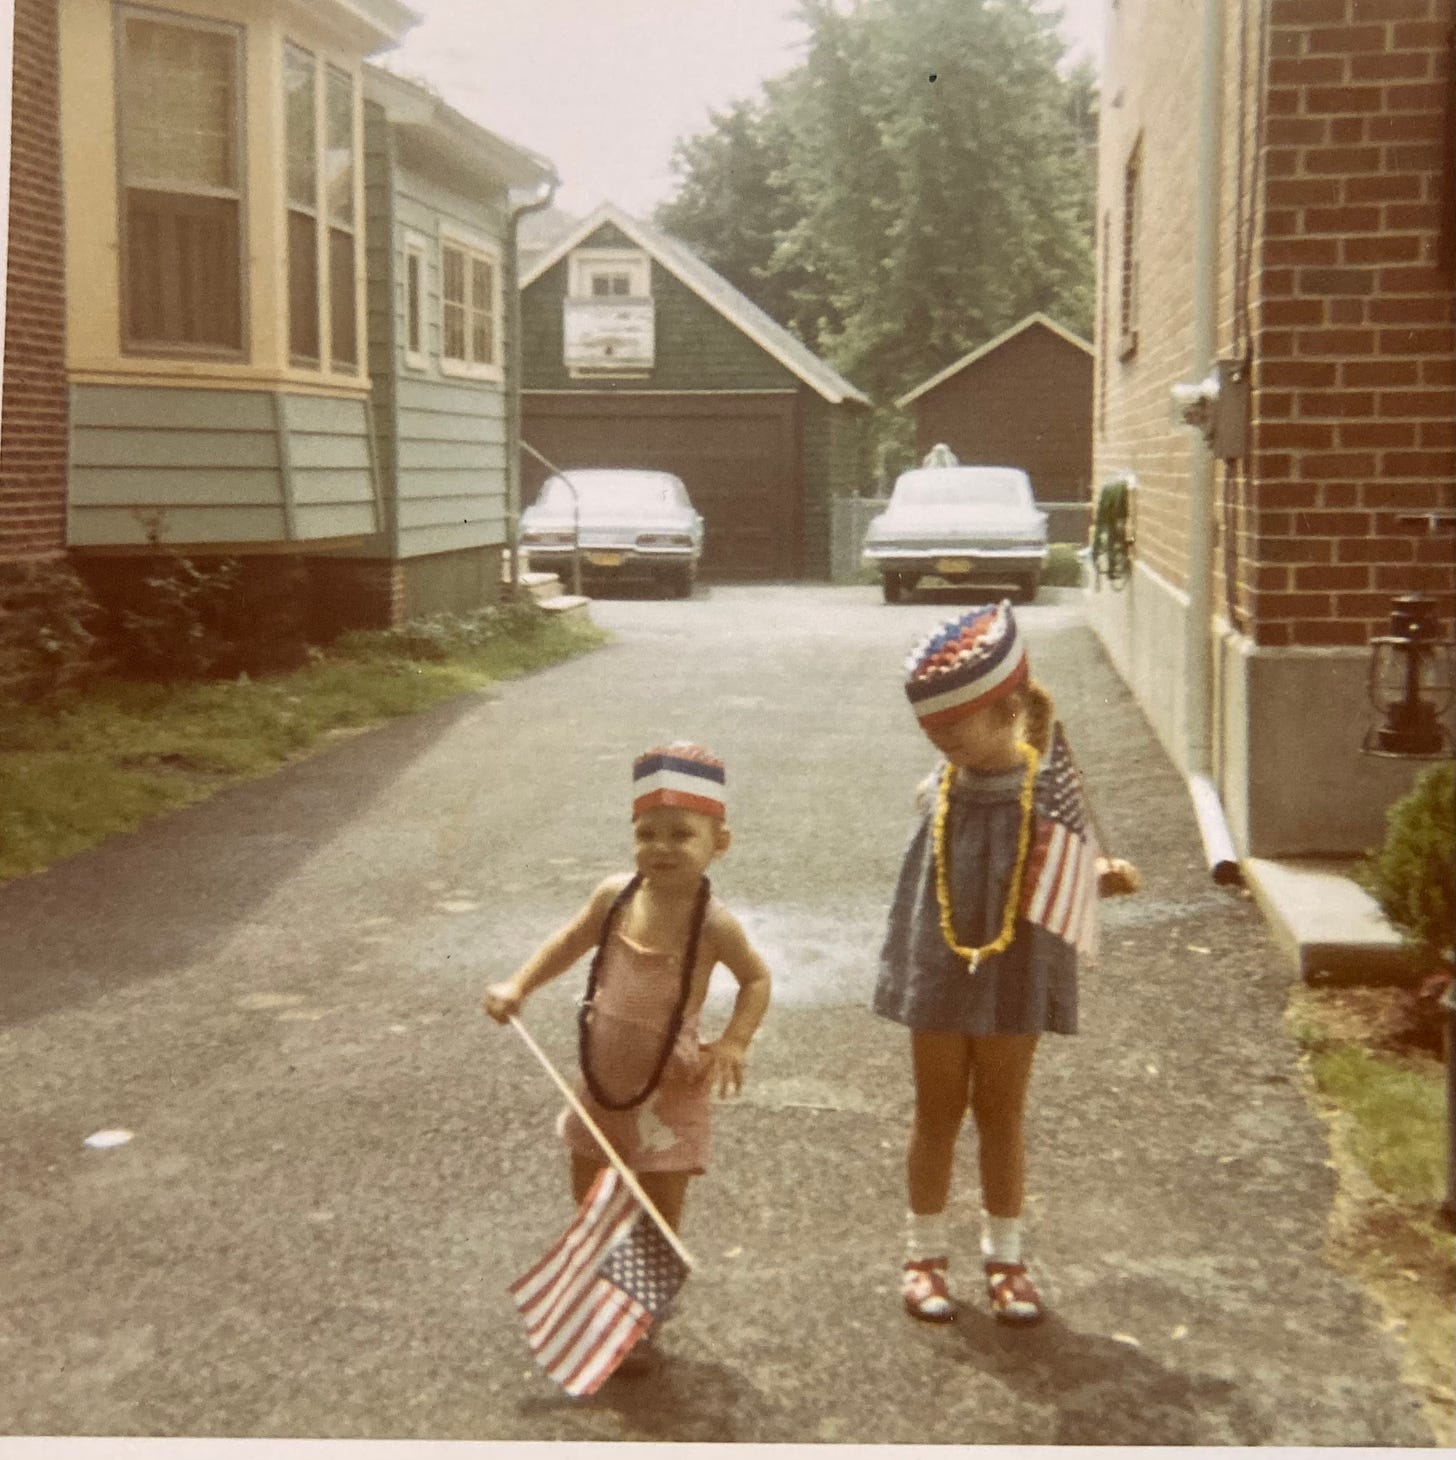 Two young children on the Fourth of July in their driveway